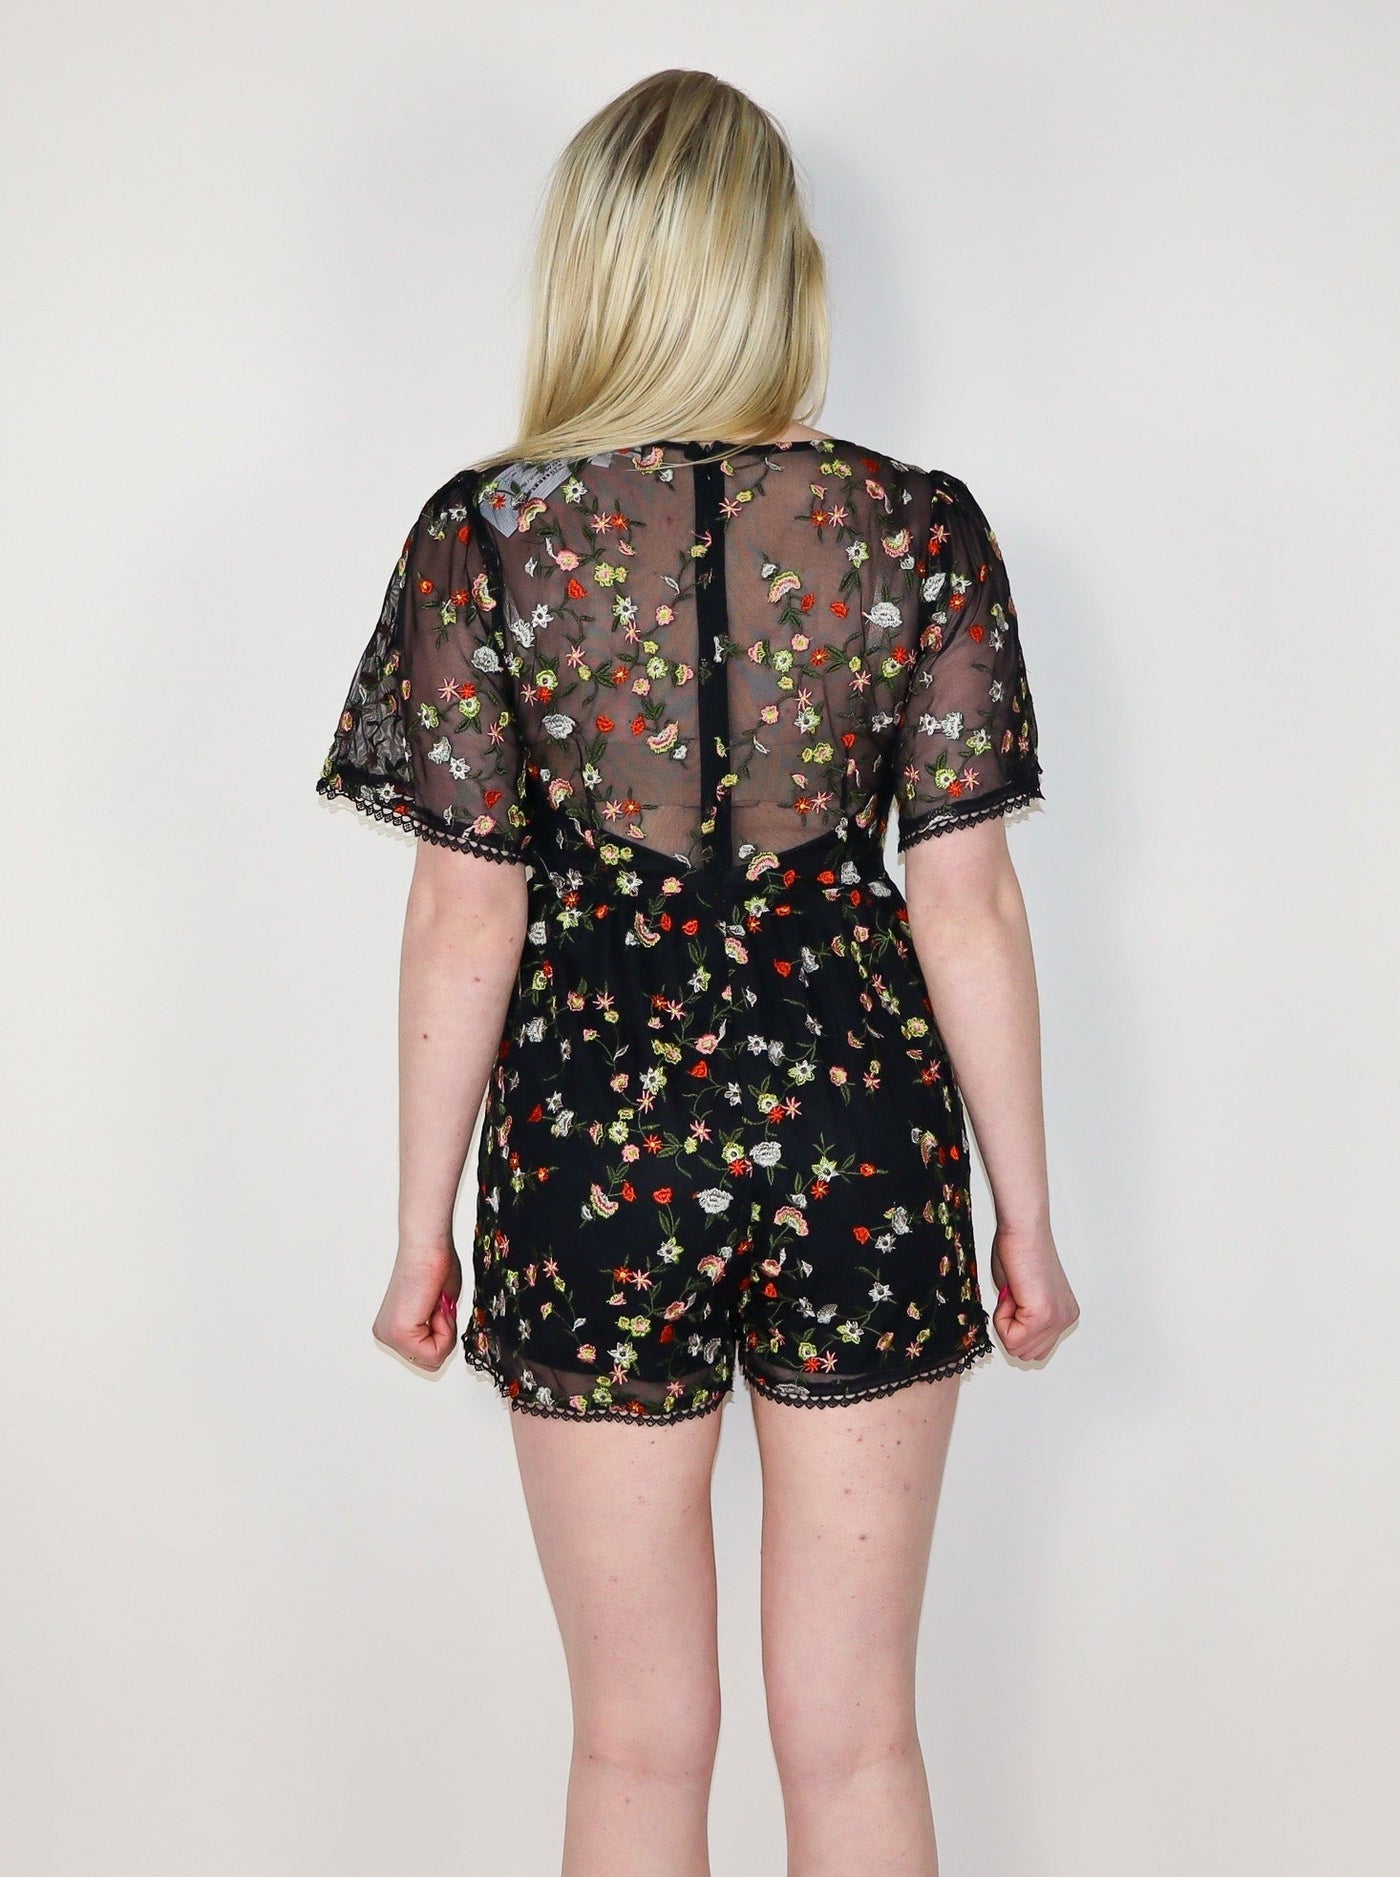 Model is wearing a sheer fitted romper with flutter sleeves and floral detail. Neckline is a deep v-neck.